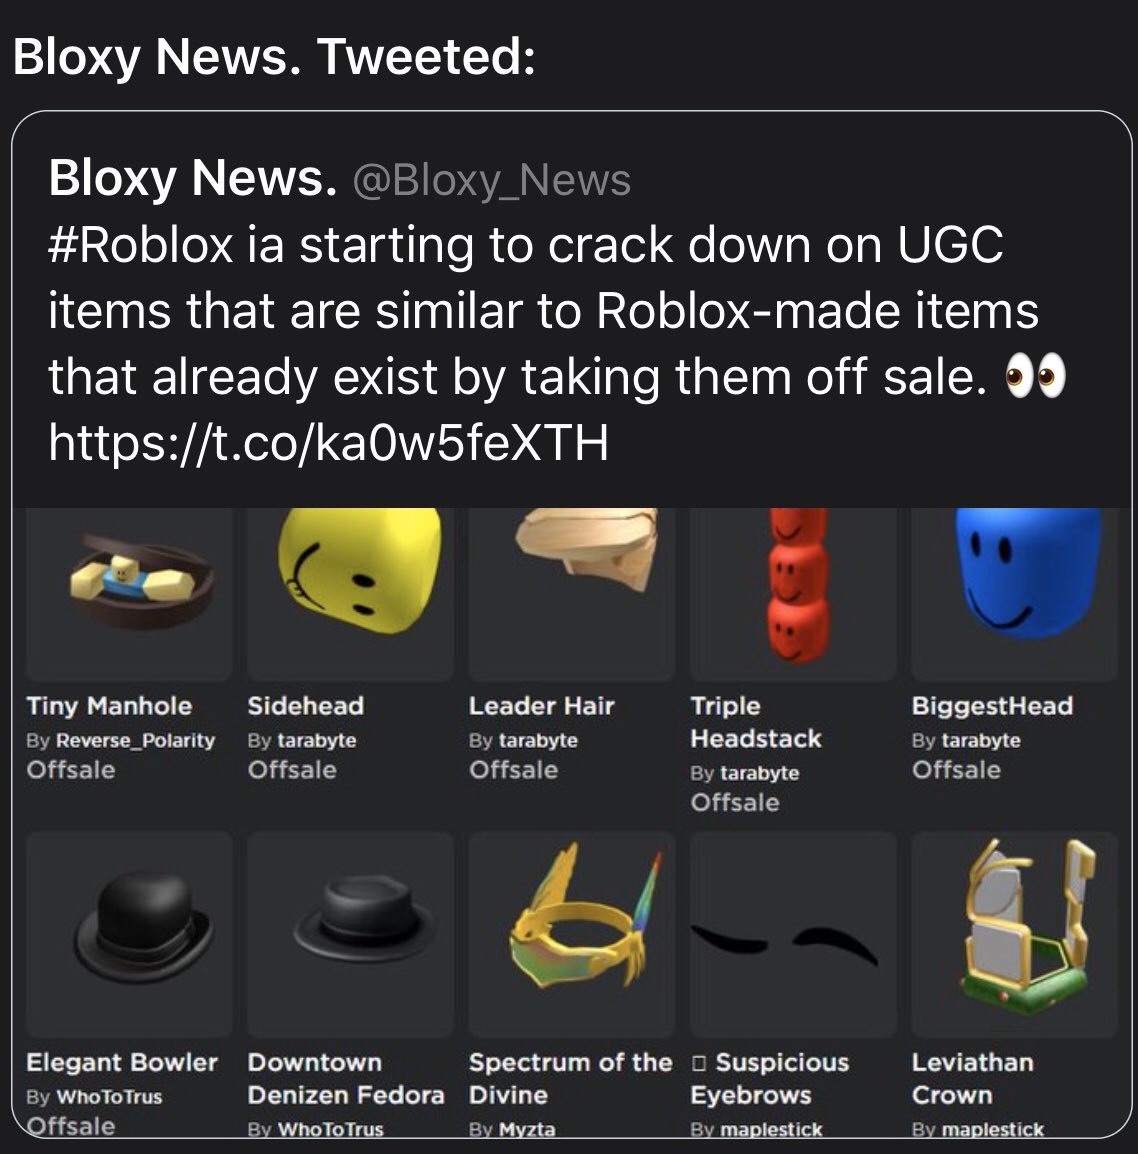 Bloxy News On Twitter Roblox Is Starting To Crack Down On Ugc Items That Are Similar To Roblox Made Items That Already Exist By Taking Them Off Sale Https T Co A1cp9qh5ii - twitter ugc roblox